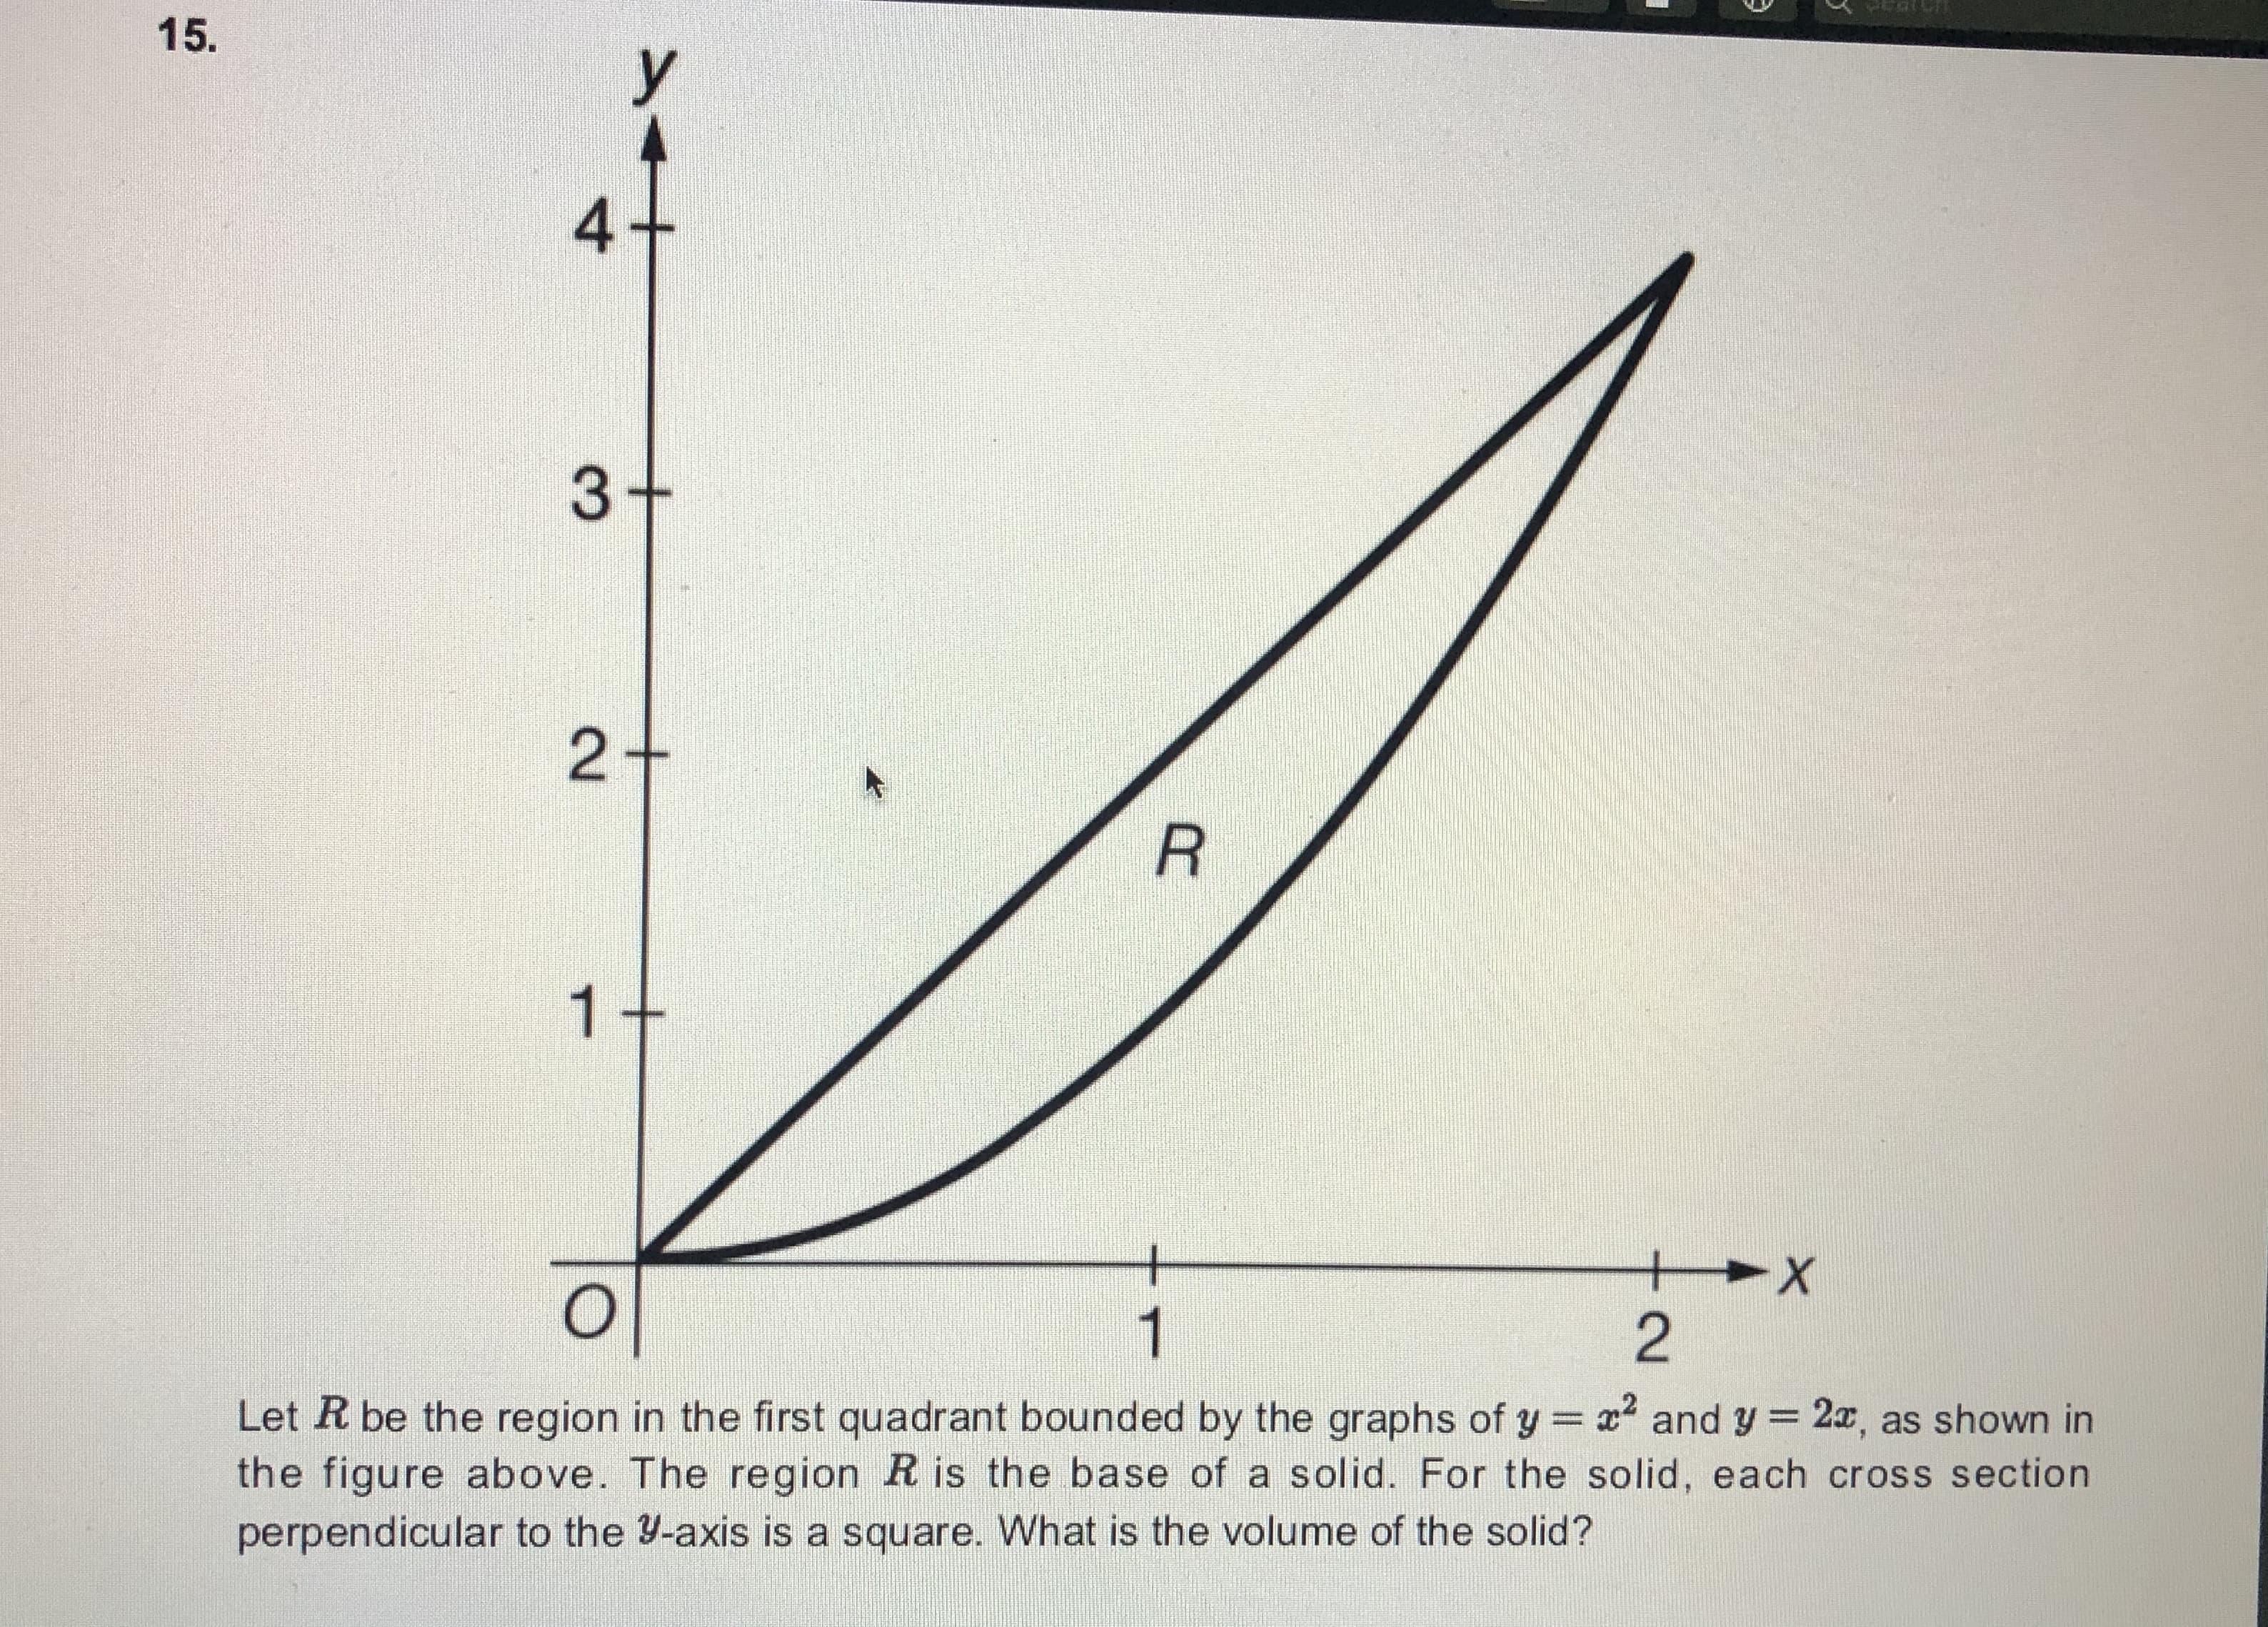 15.
3+
1
+
1
Let R be the region in the first quadrant bounded by the graphs of y x and y = 2x, as shown in
the figure above. The region R is the base of a solid. For the solid, each cross section
perpendicular to the Y-axis is a square. What is the volume of the solid?
%3D
4.
2.
